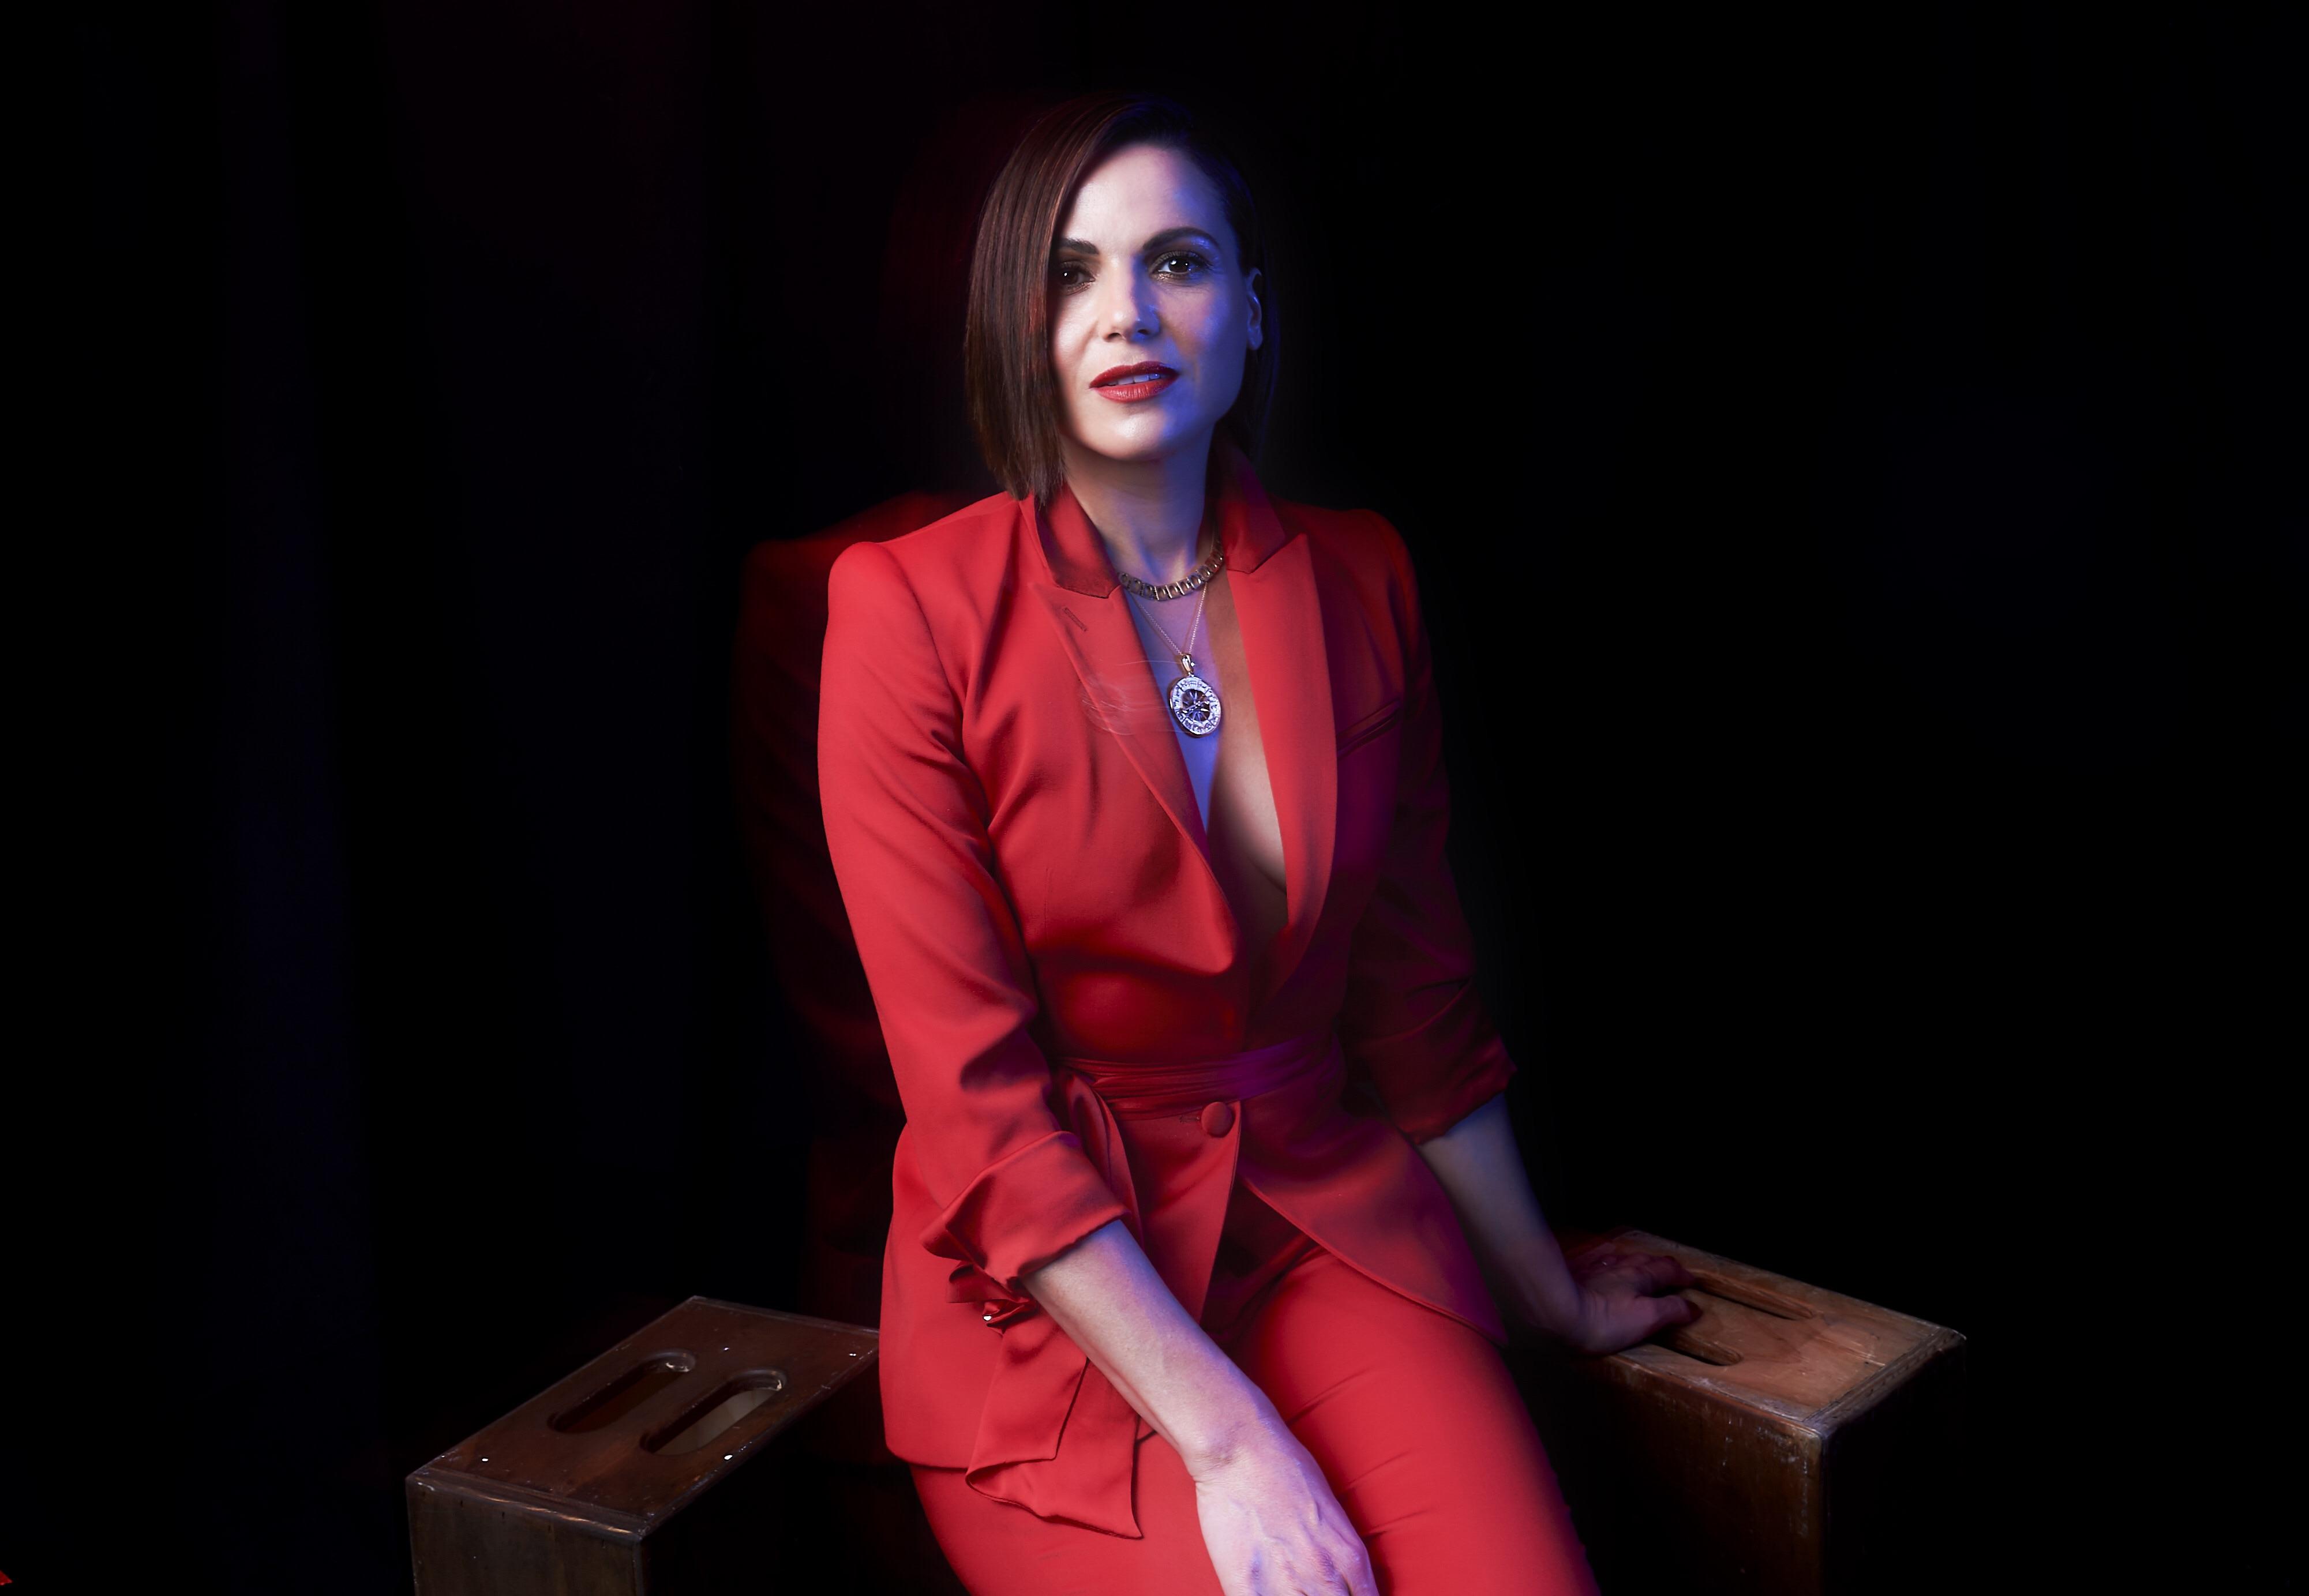 Side Z. reccomend Lana parrilla movies and tv shows